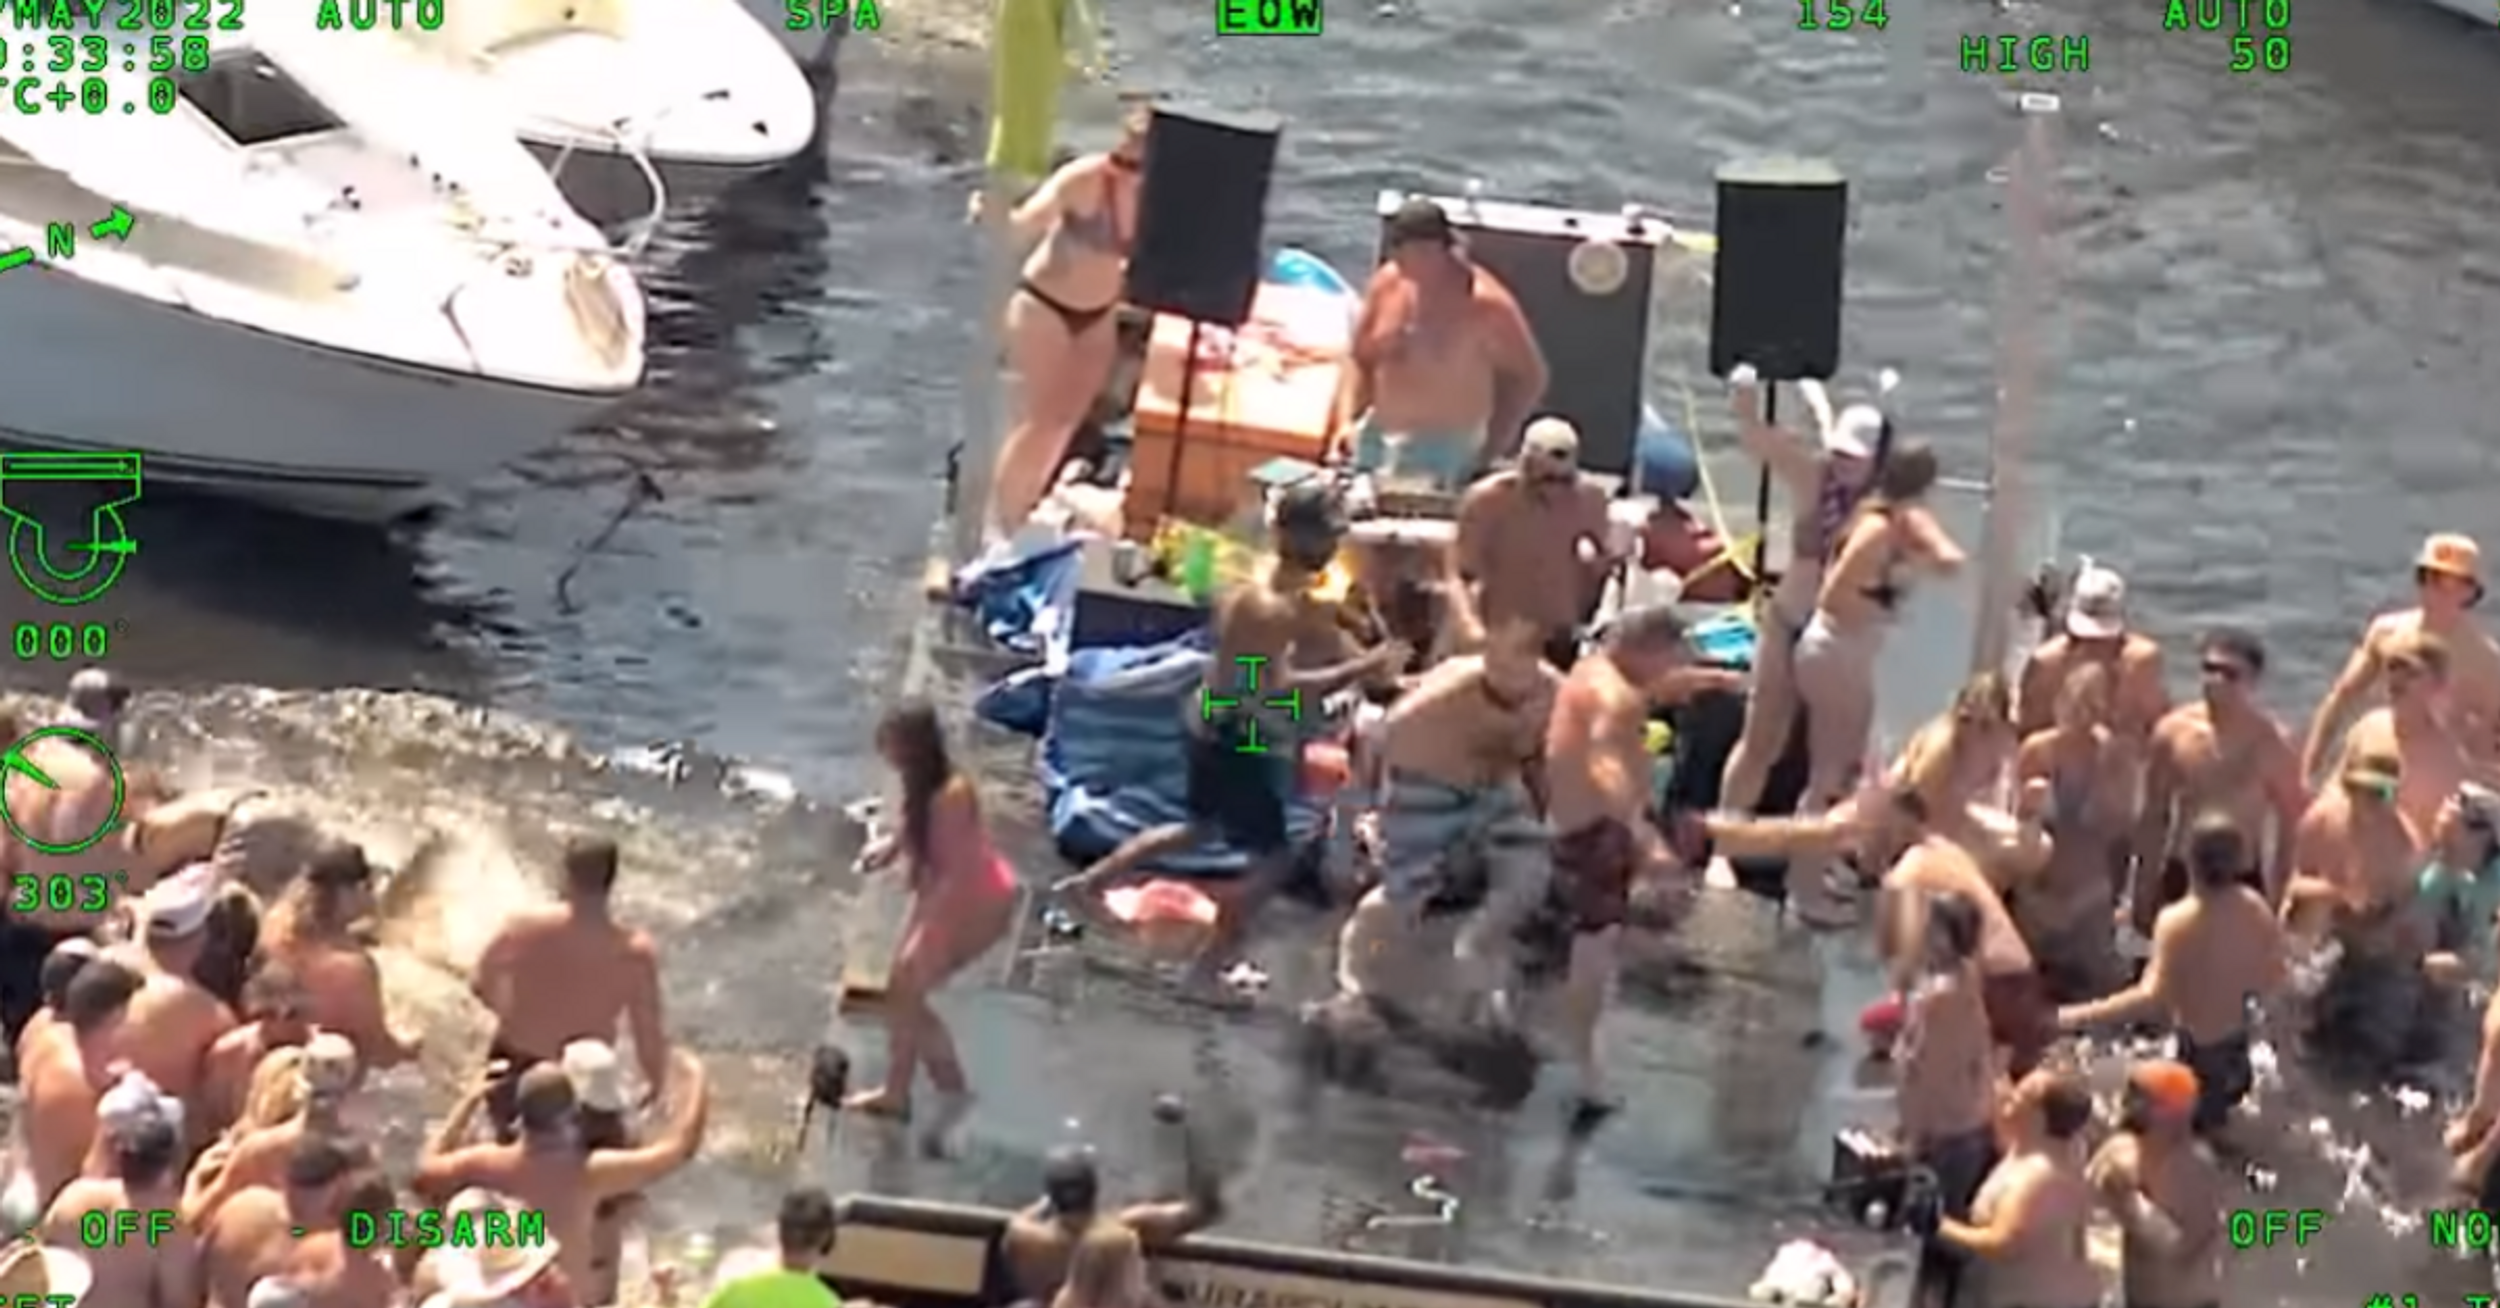 'Mayhem At Lake George' Event In Florida Is True To Its Name As Brawl Breaks Out In Wild Video